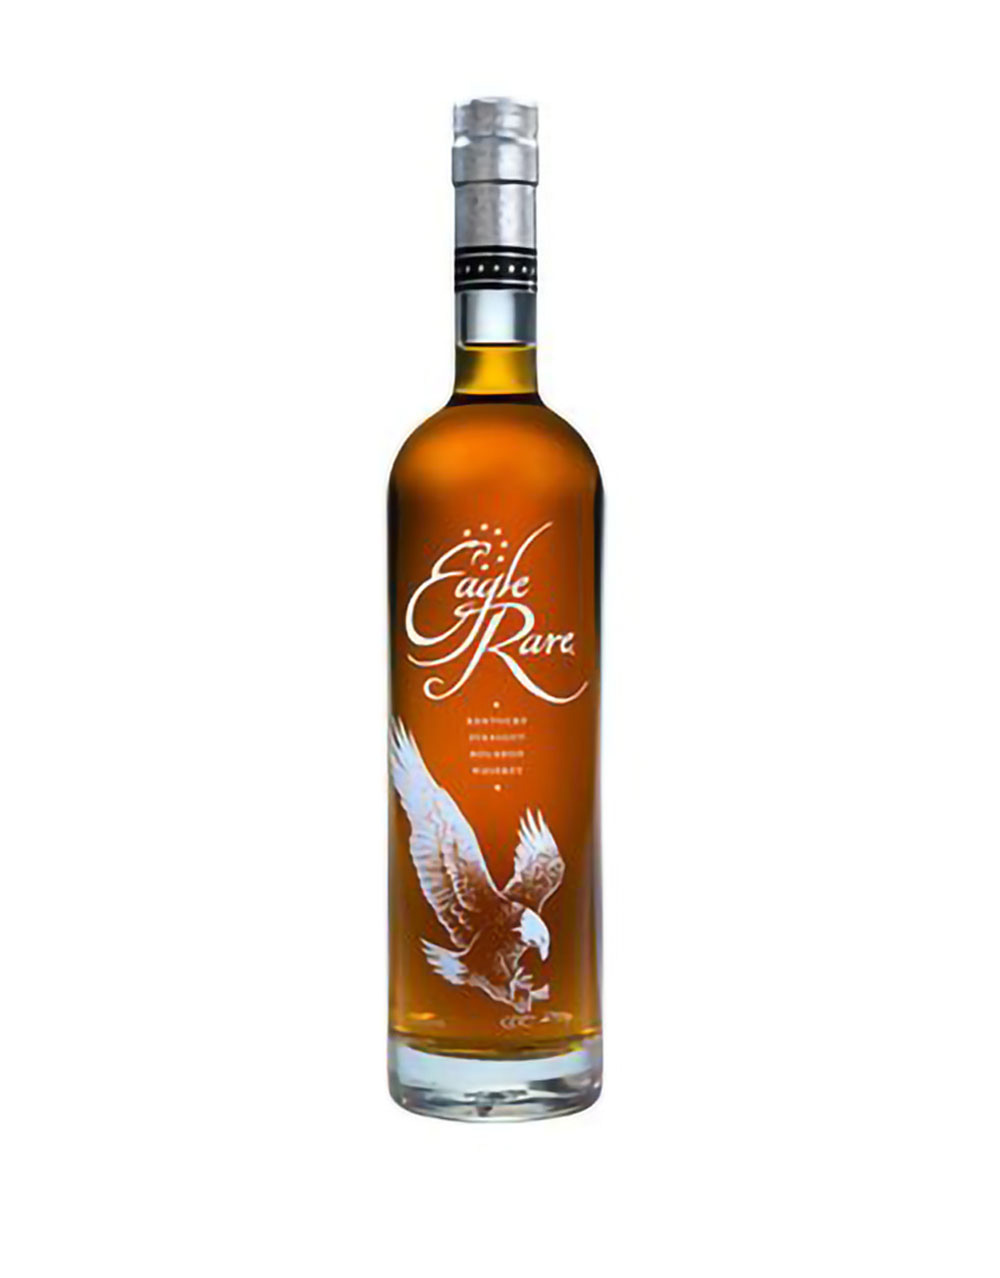 Eagle Rare 10 Year Old Kentucky Straight Bourbon Whiskey 1.75L